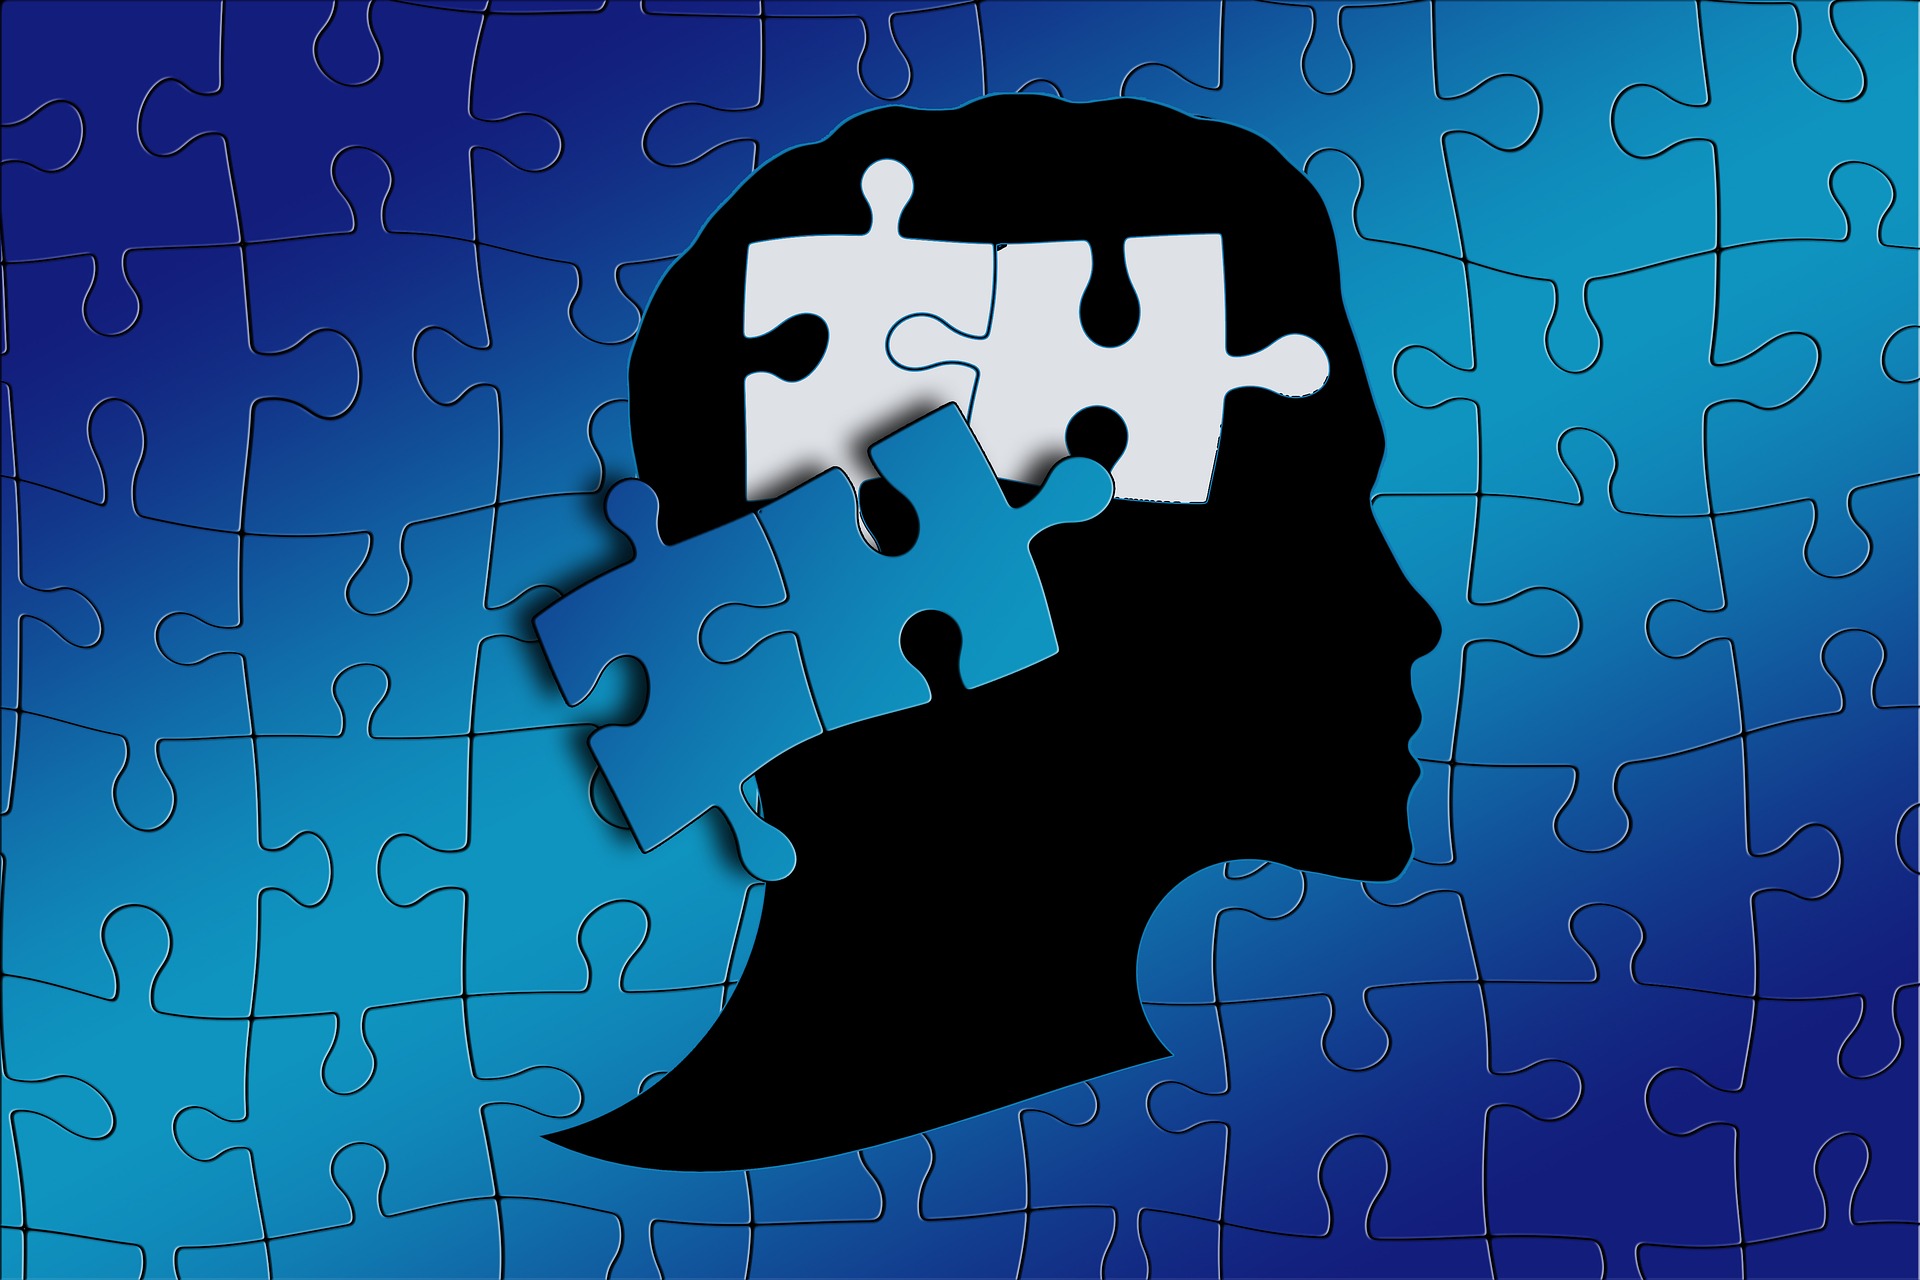 Silhouette of a head with puzzle pieces